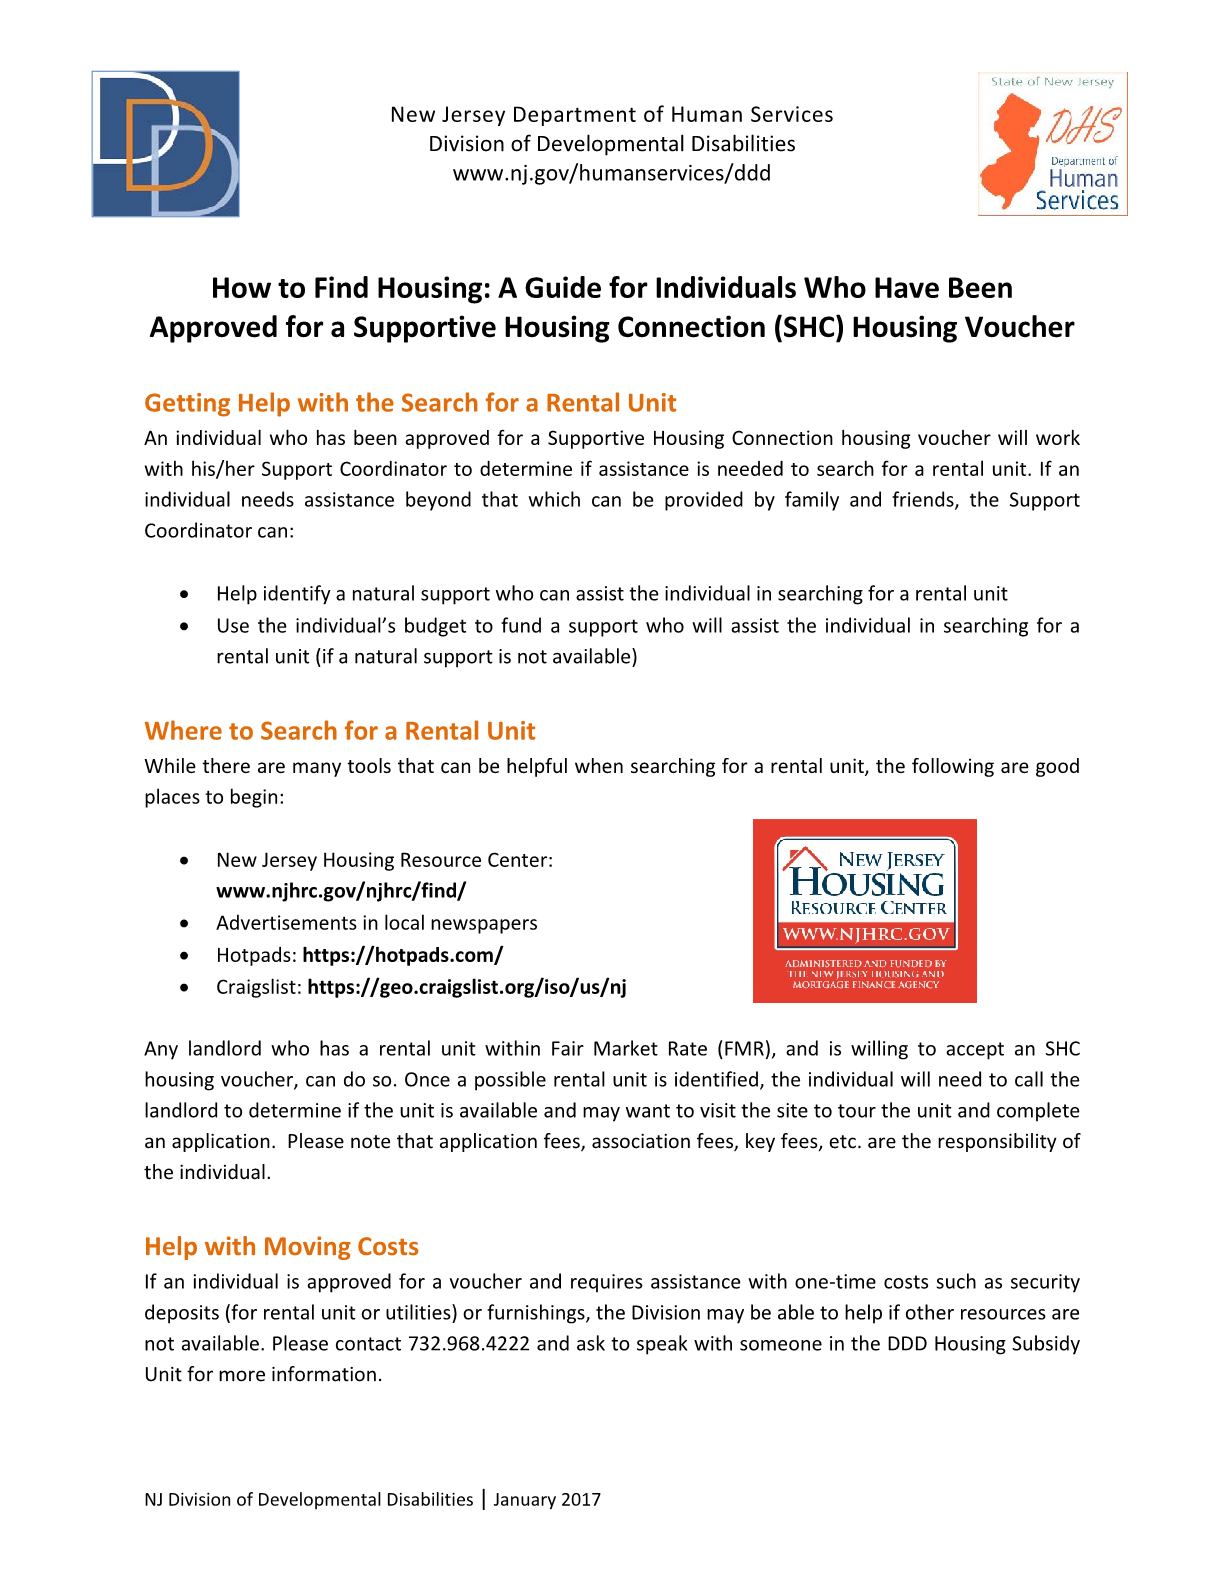 How to Find Housing: A Guide for Individuals Who Have Been Approved for a Supportive Housing Connection (SHC) Housing Voucher